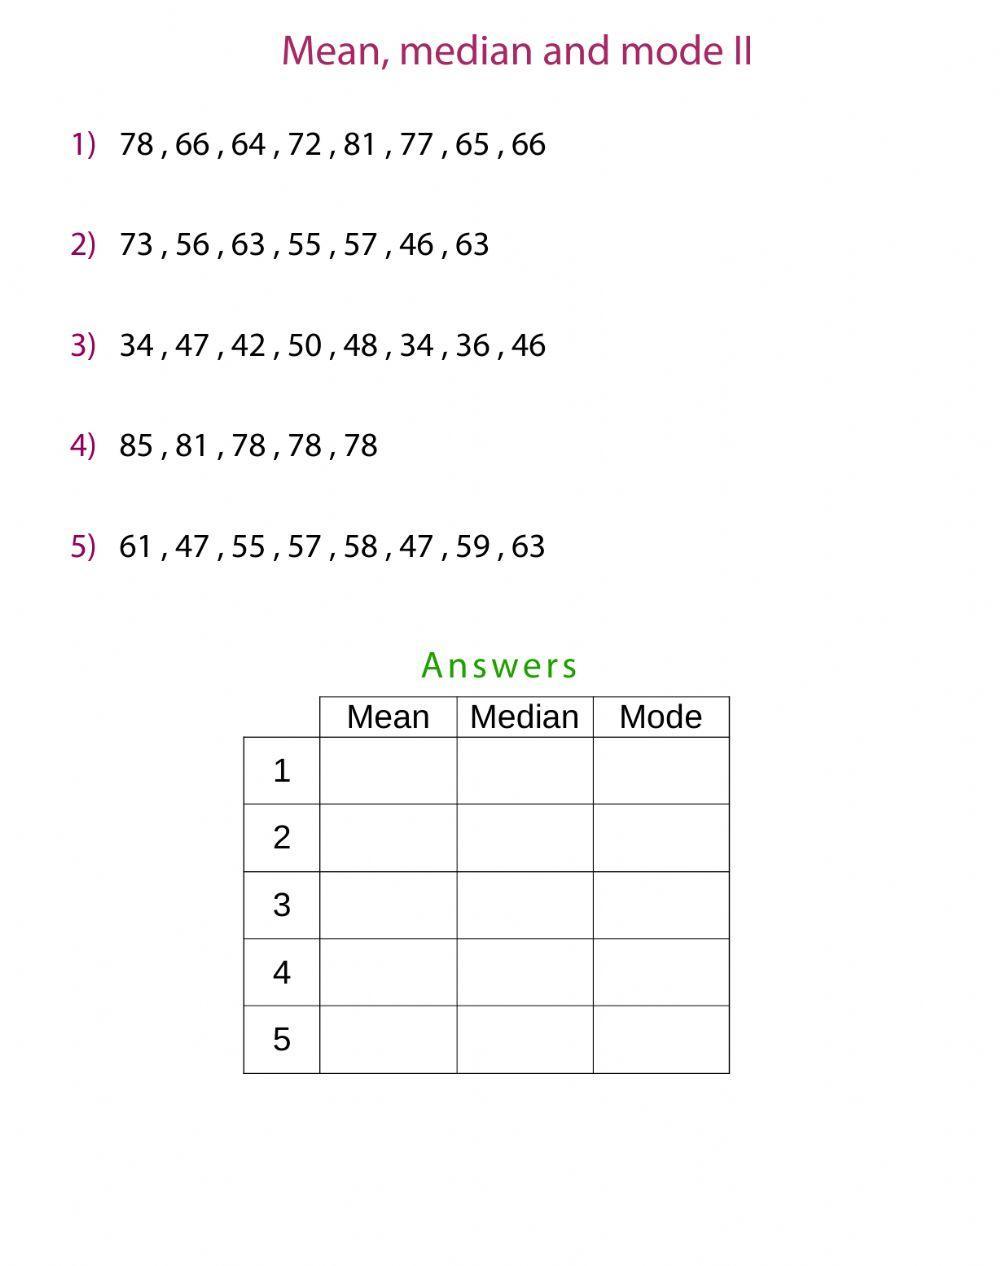 Mean, median and mode